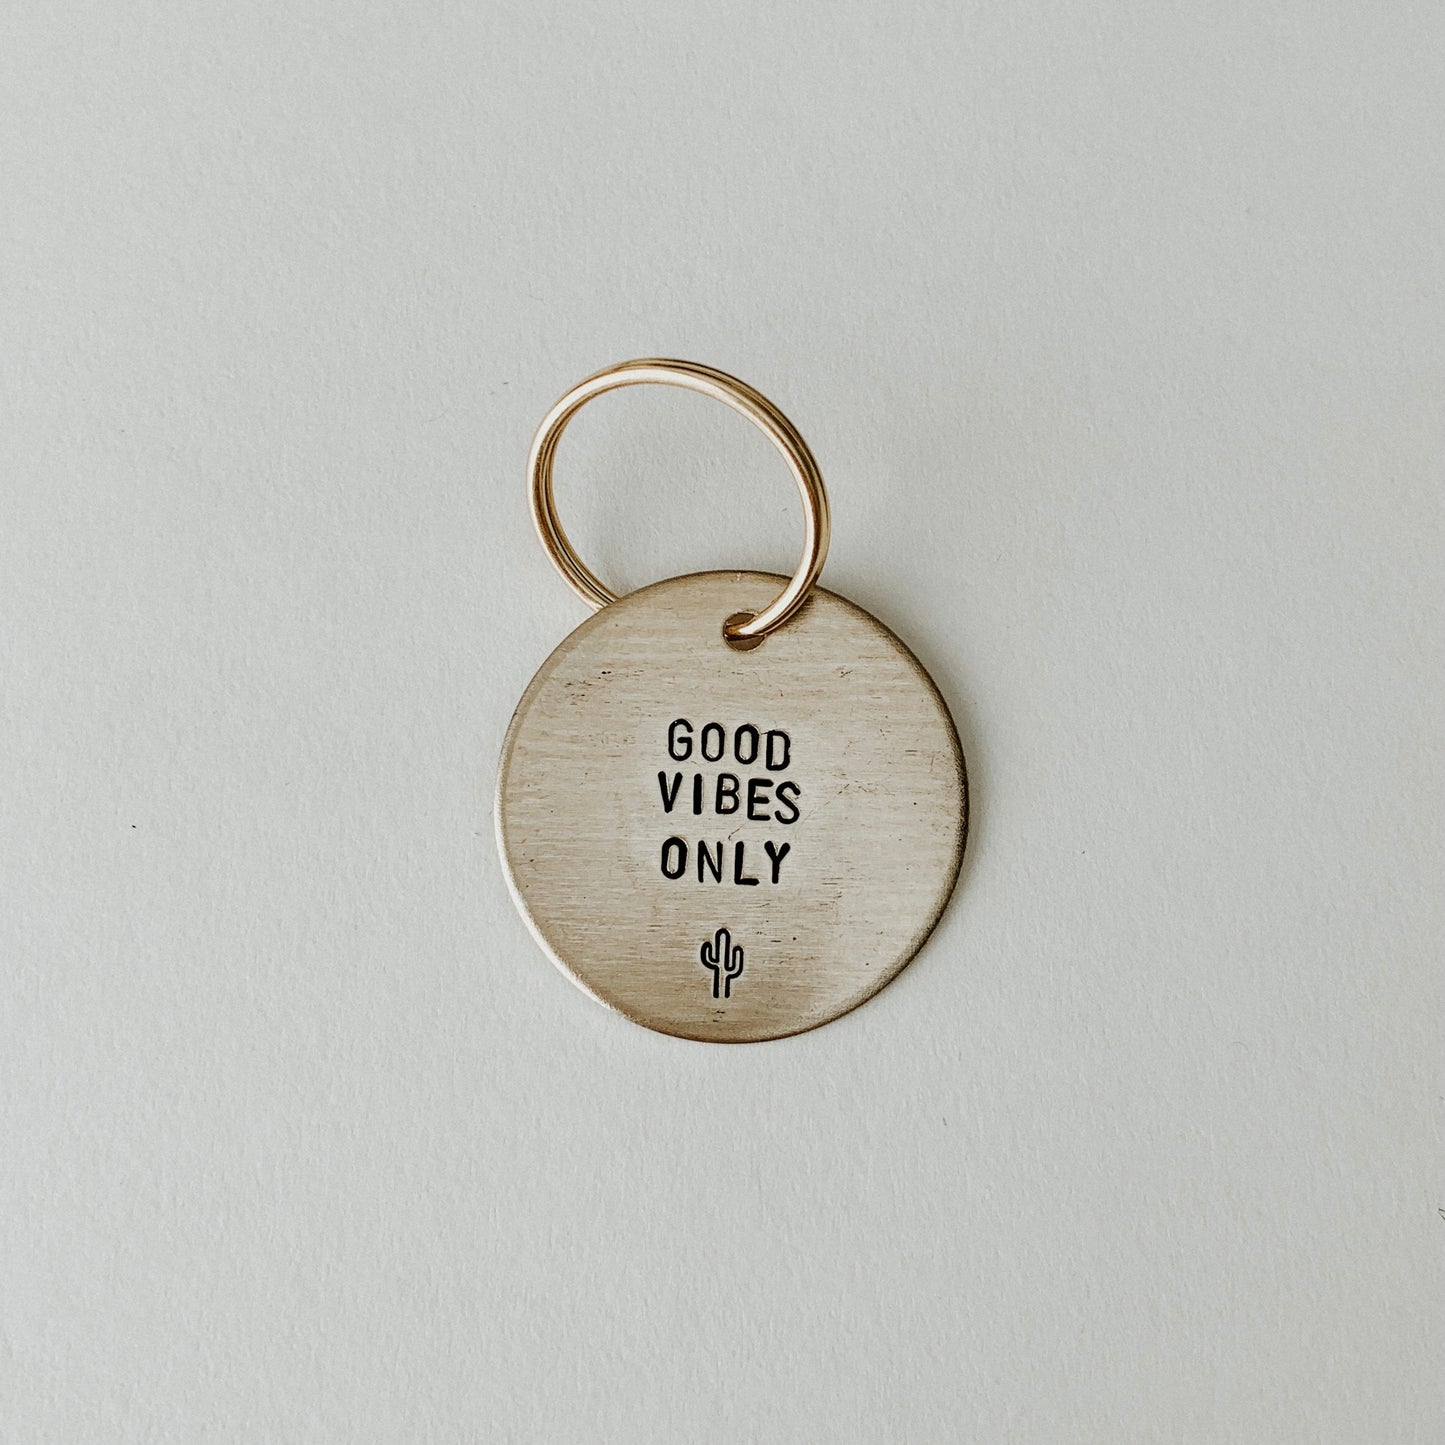 GOOD VIBES ONLY / Large Brass Key Tag